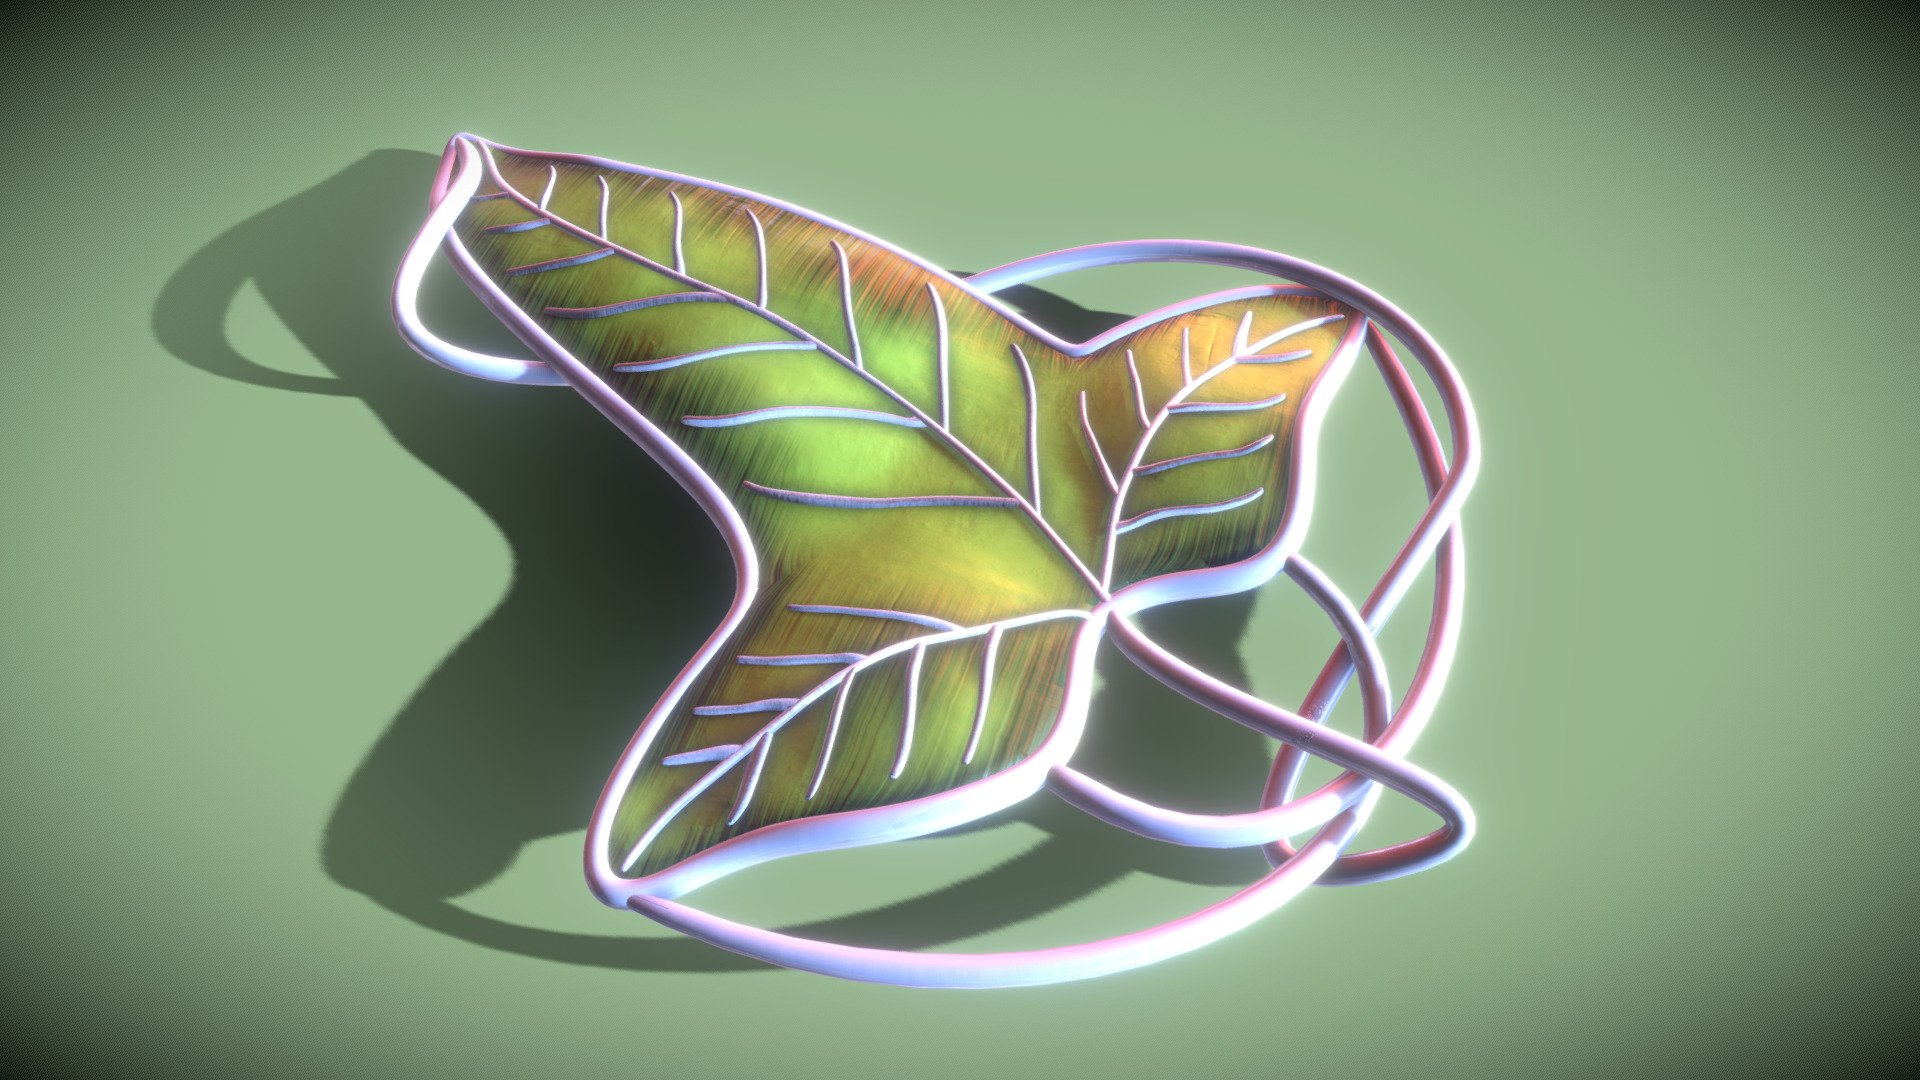 Leaf of Lorien (Lord of the Rings)